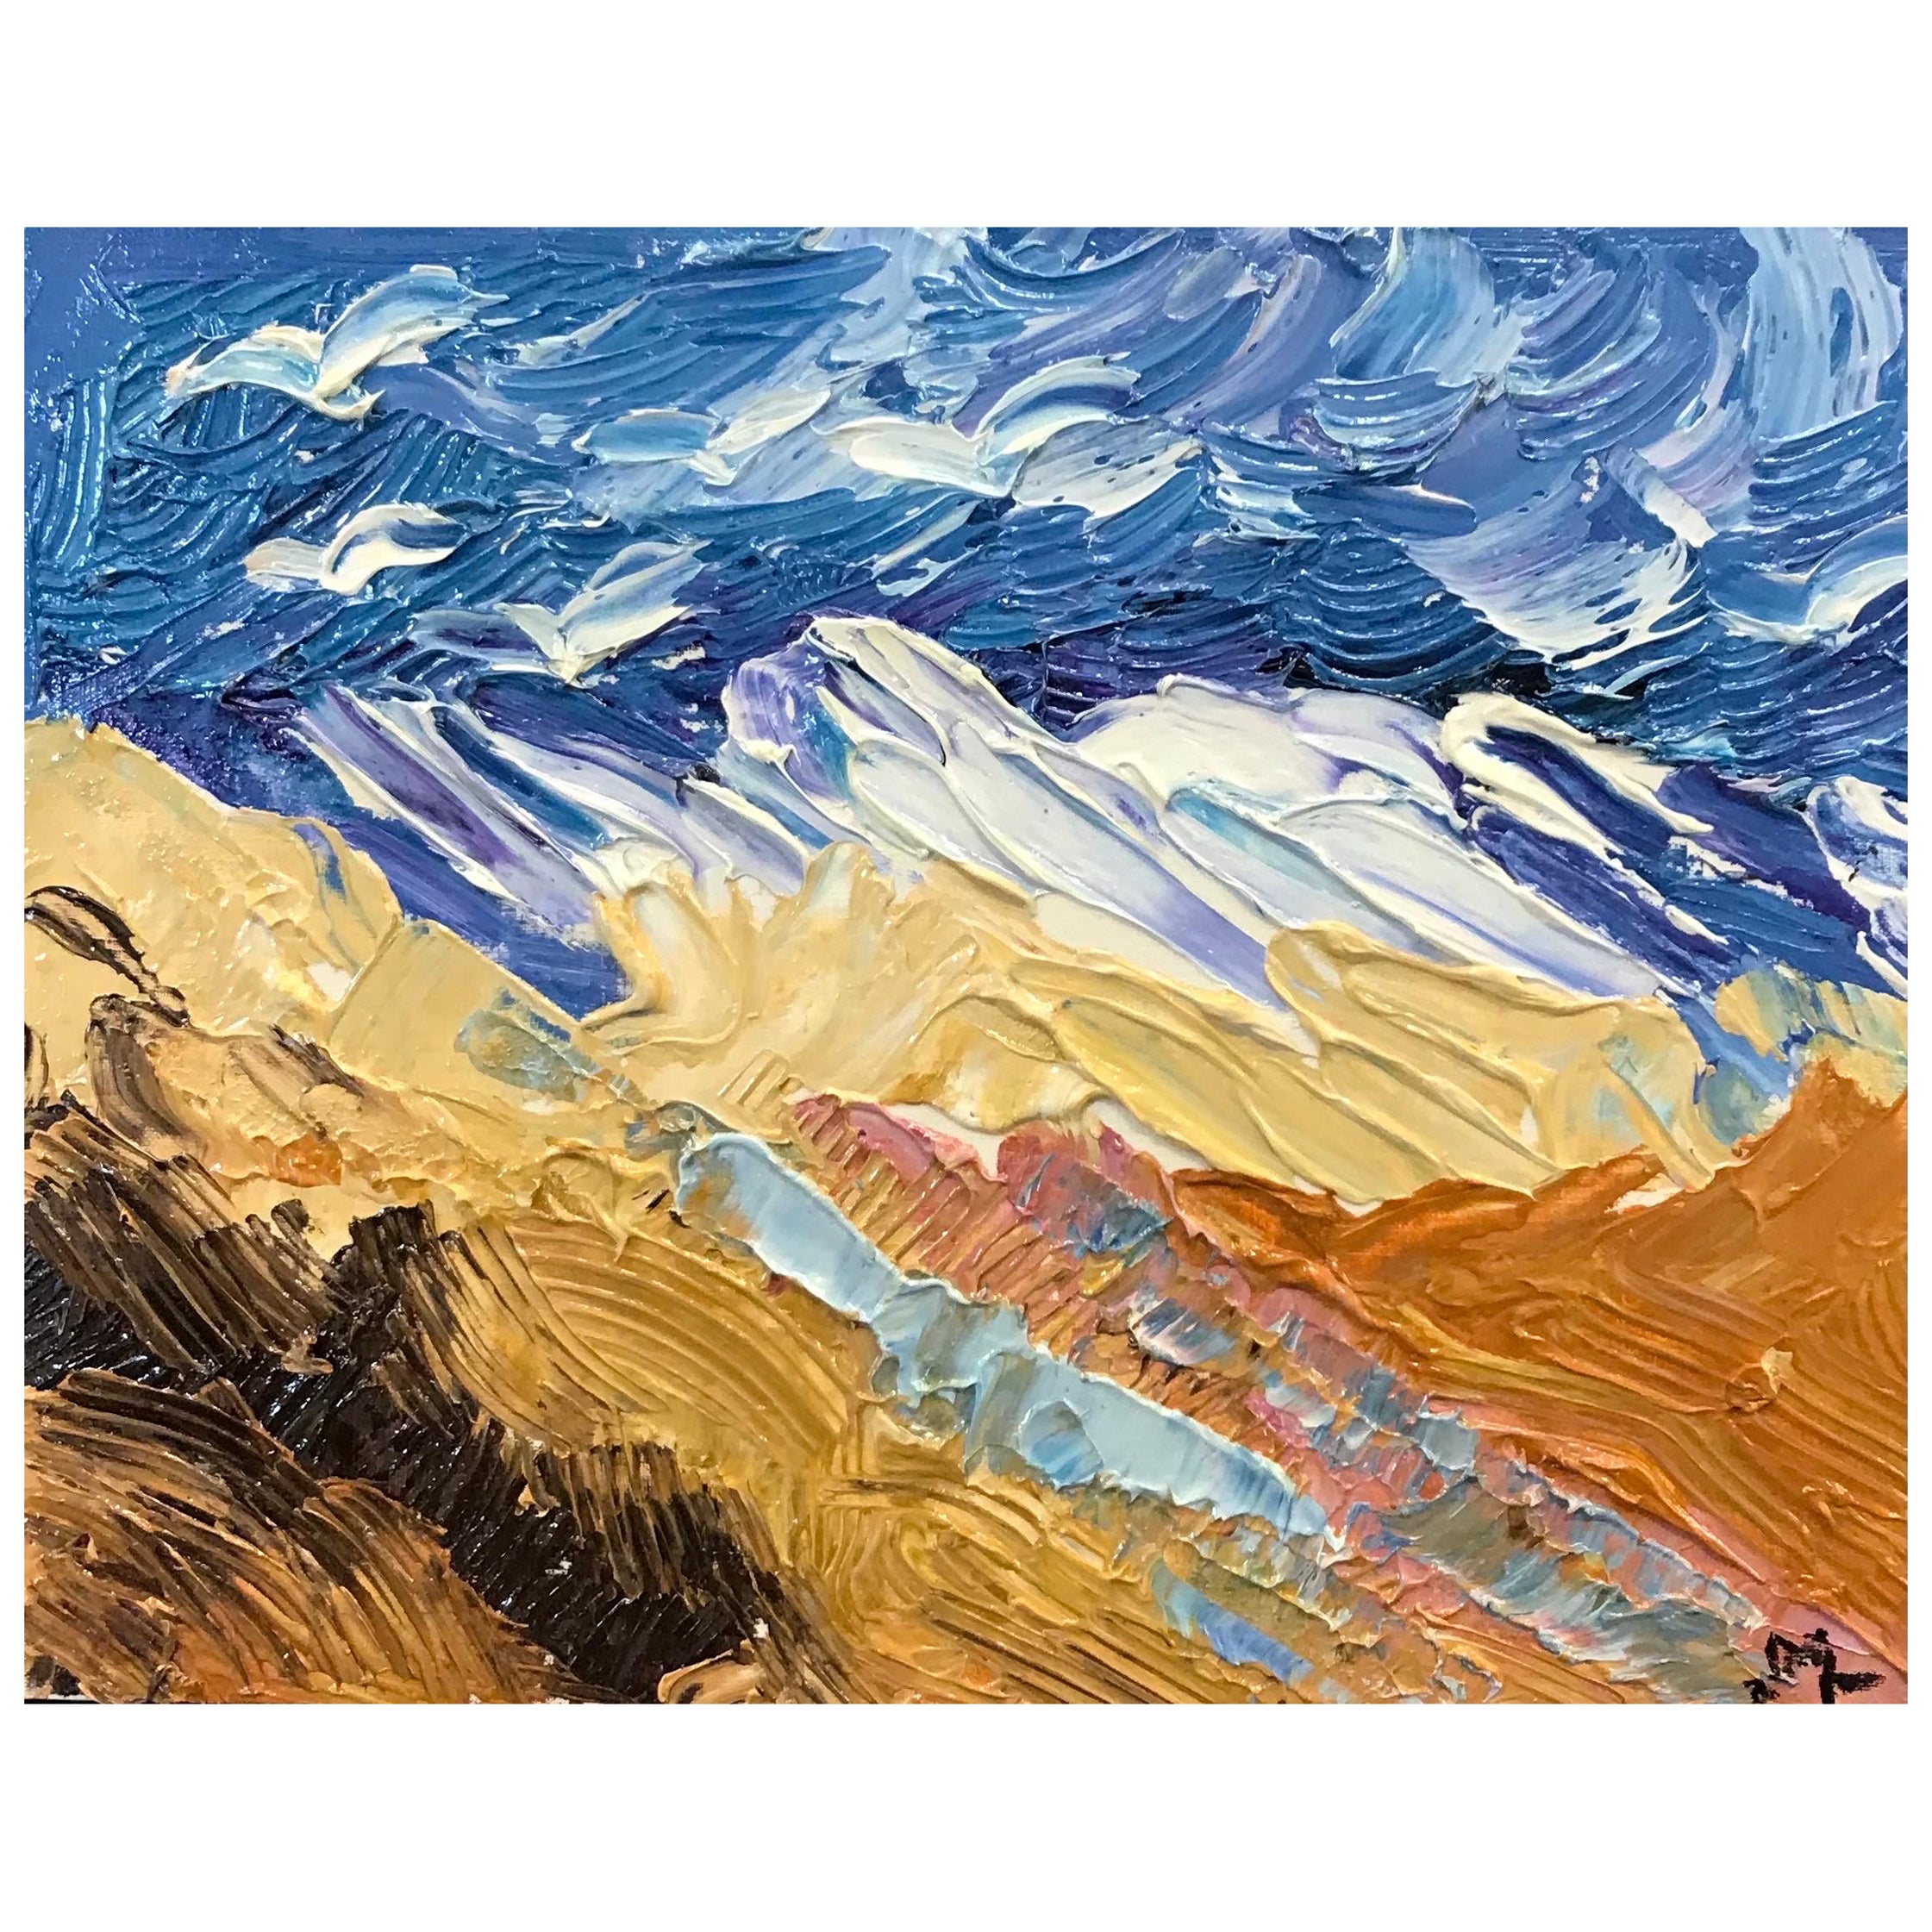 Bright & Colorful French Impressionist Oil Painting, Seagulls Over Mountains